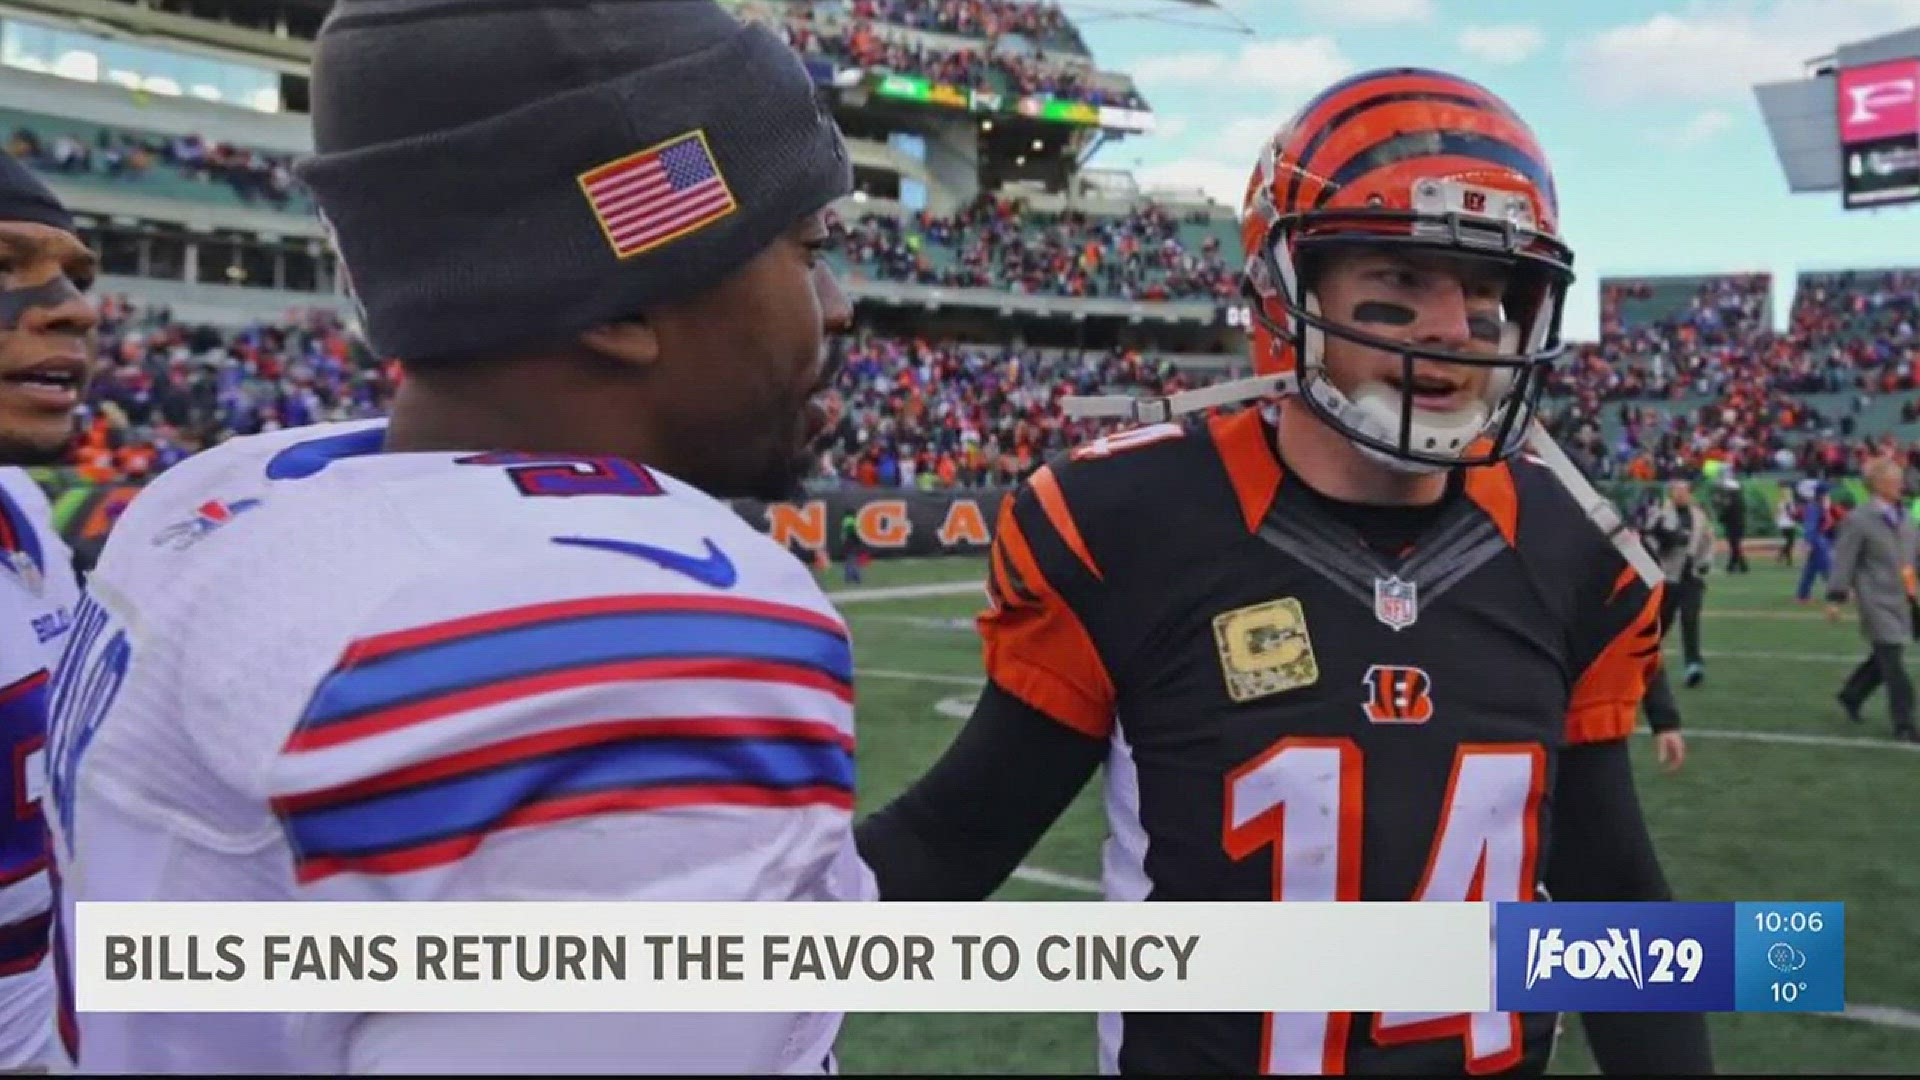 Bills fans thanked Andy Dalton by donating to his foundation.